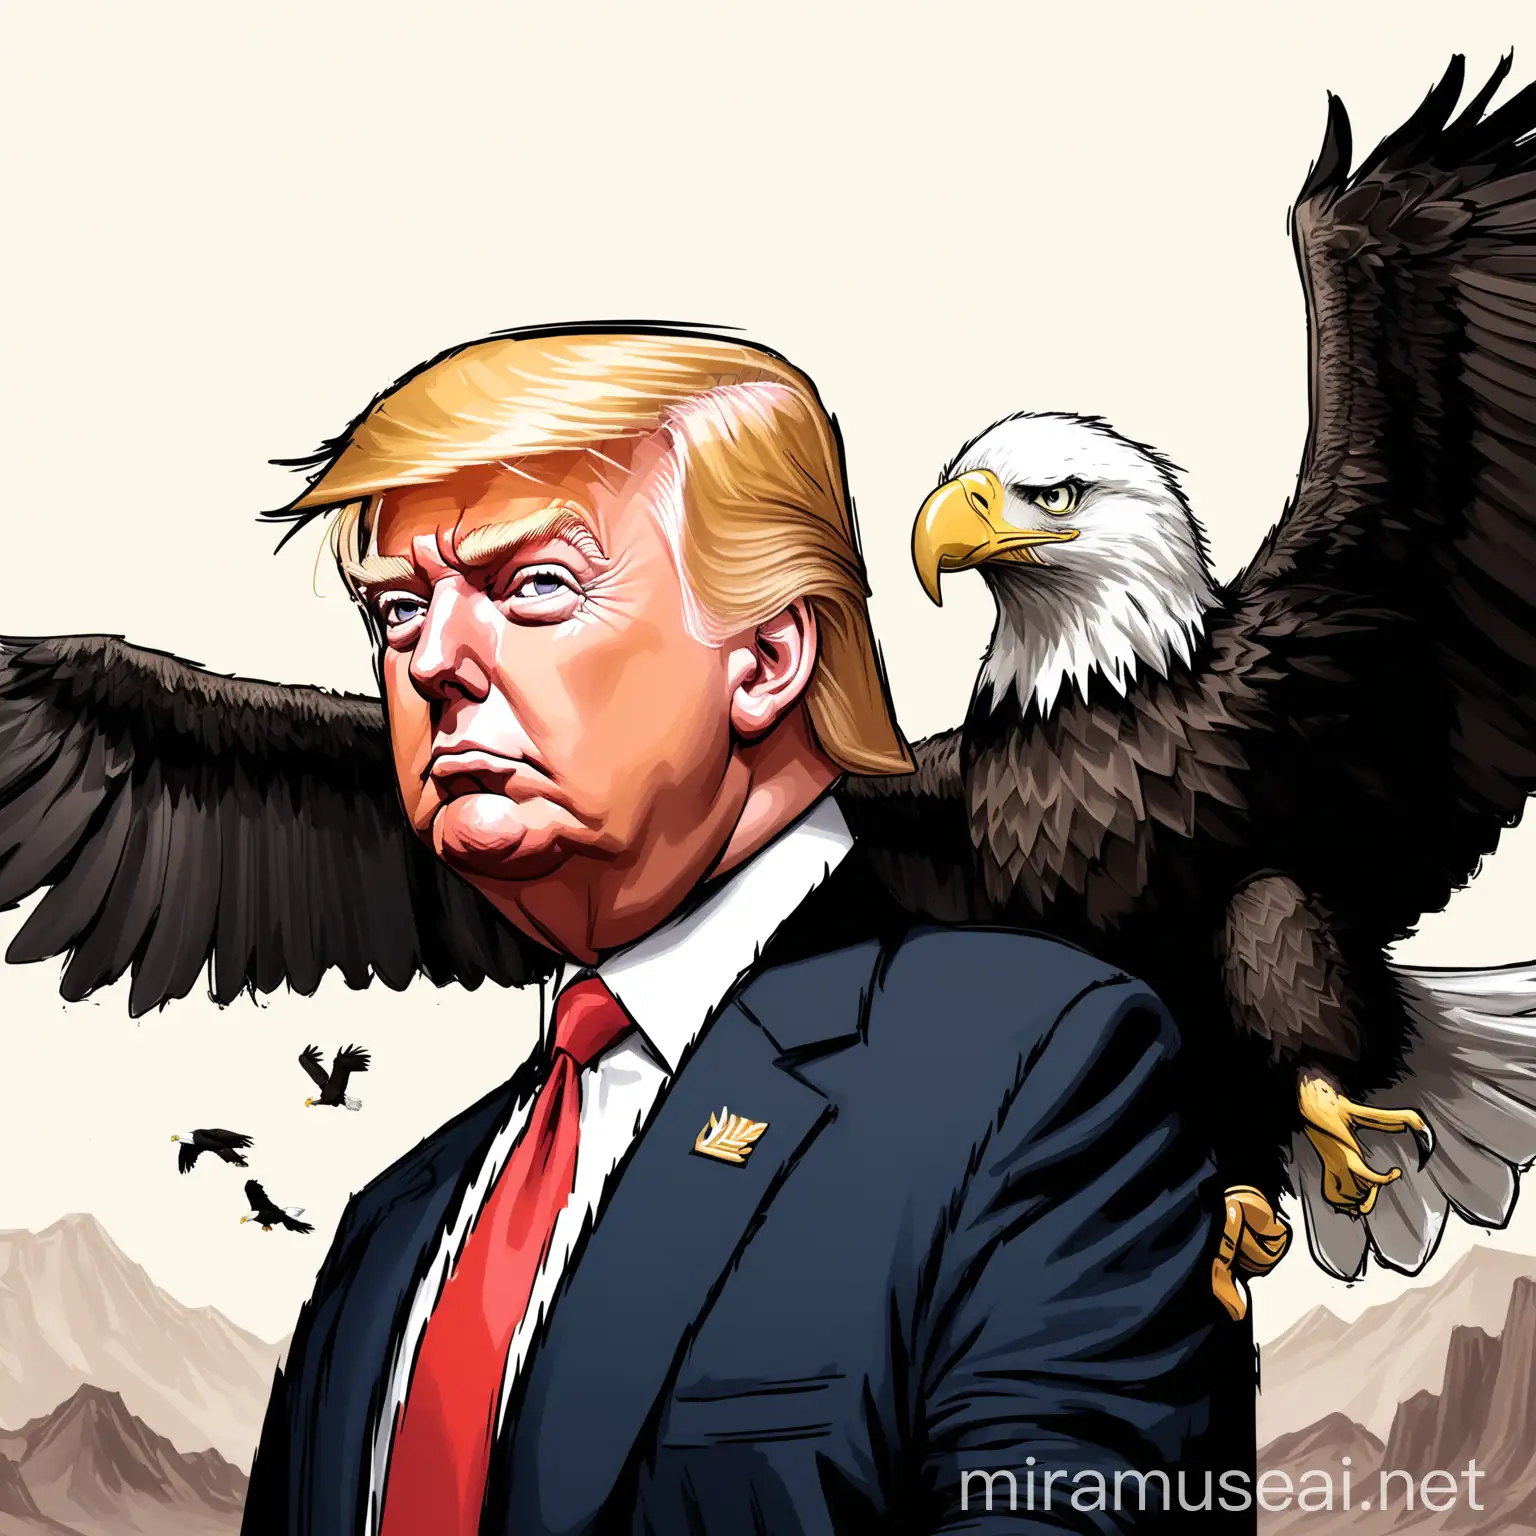 illustration of Donald Trump with bald eagle behind

